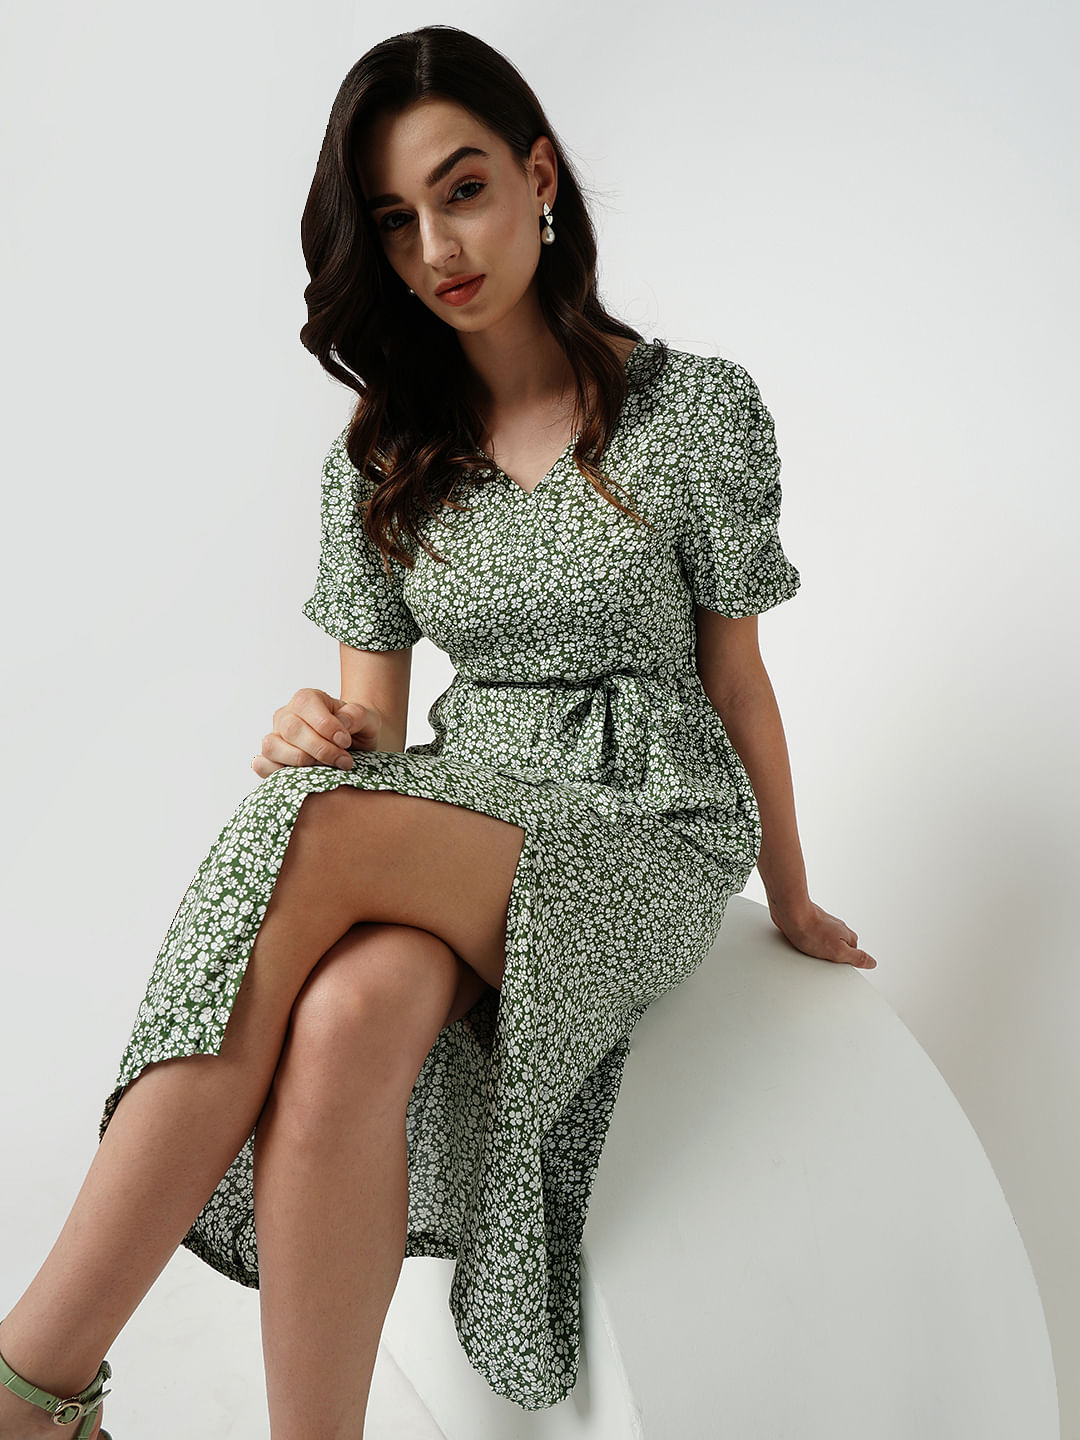 Woman's Midi dresses ${IF Category.pageTitle OR Category.ID CONTAINS  Constant('outlet') OR Category.ID CONTAINS Constant('saldi') OR Category.ID  CONTAINS Constant('easywear') OR Category.ID CONTAINS  Constant('shop-by-inspiration') THEN Constant ...